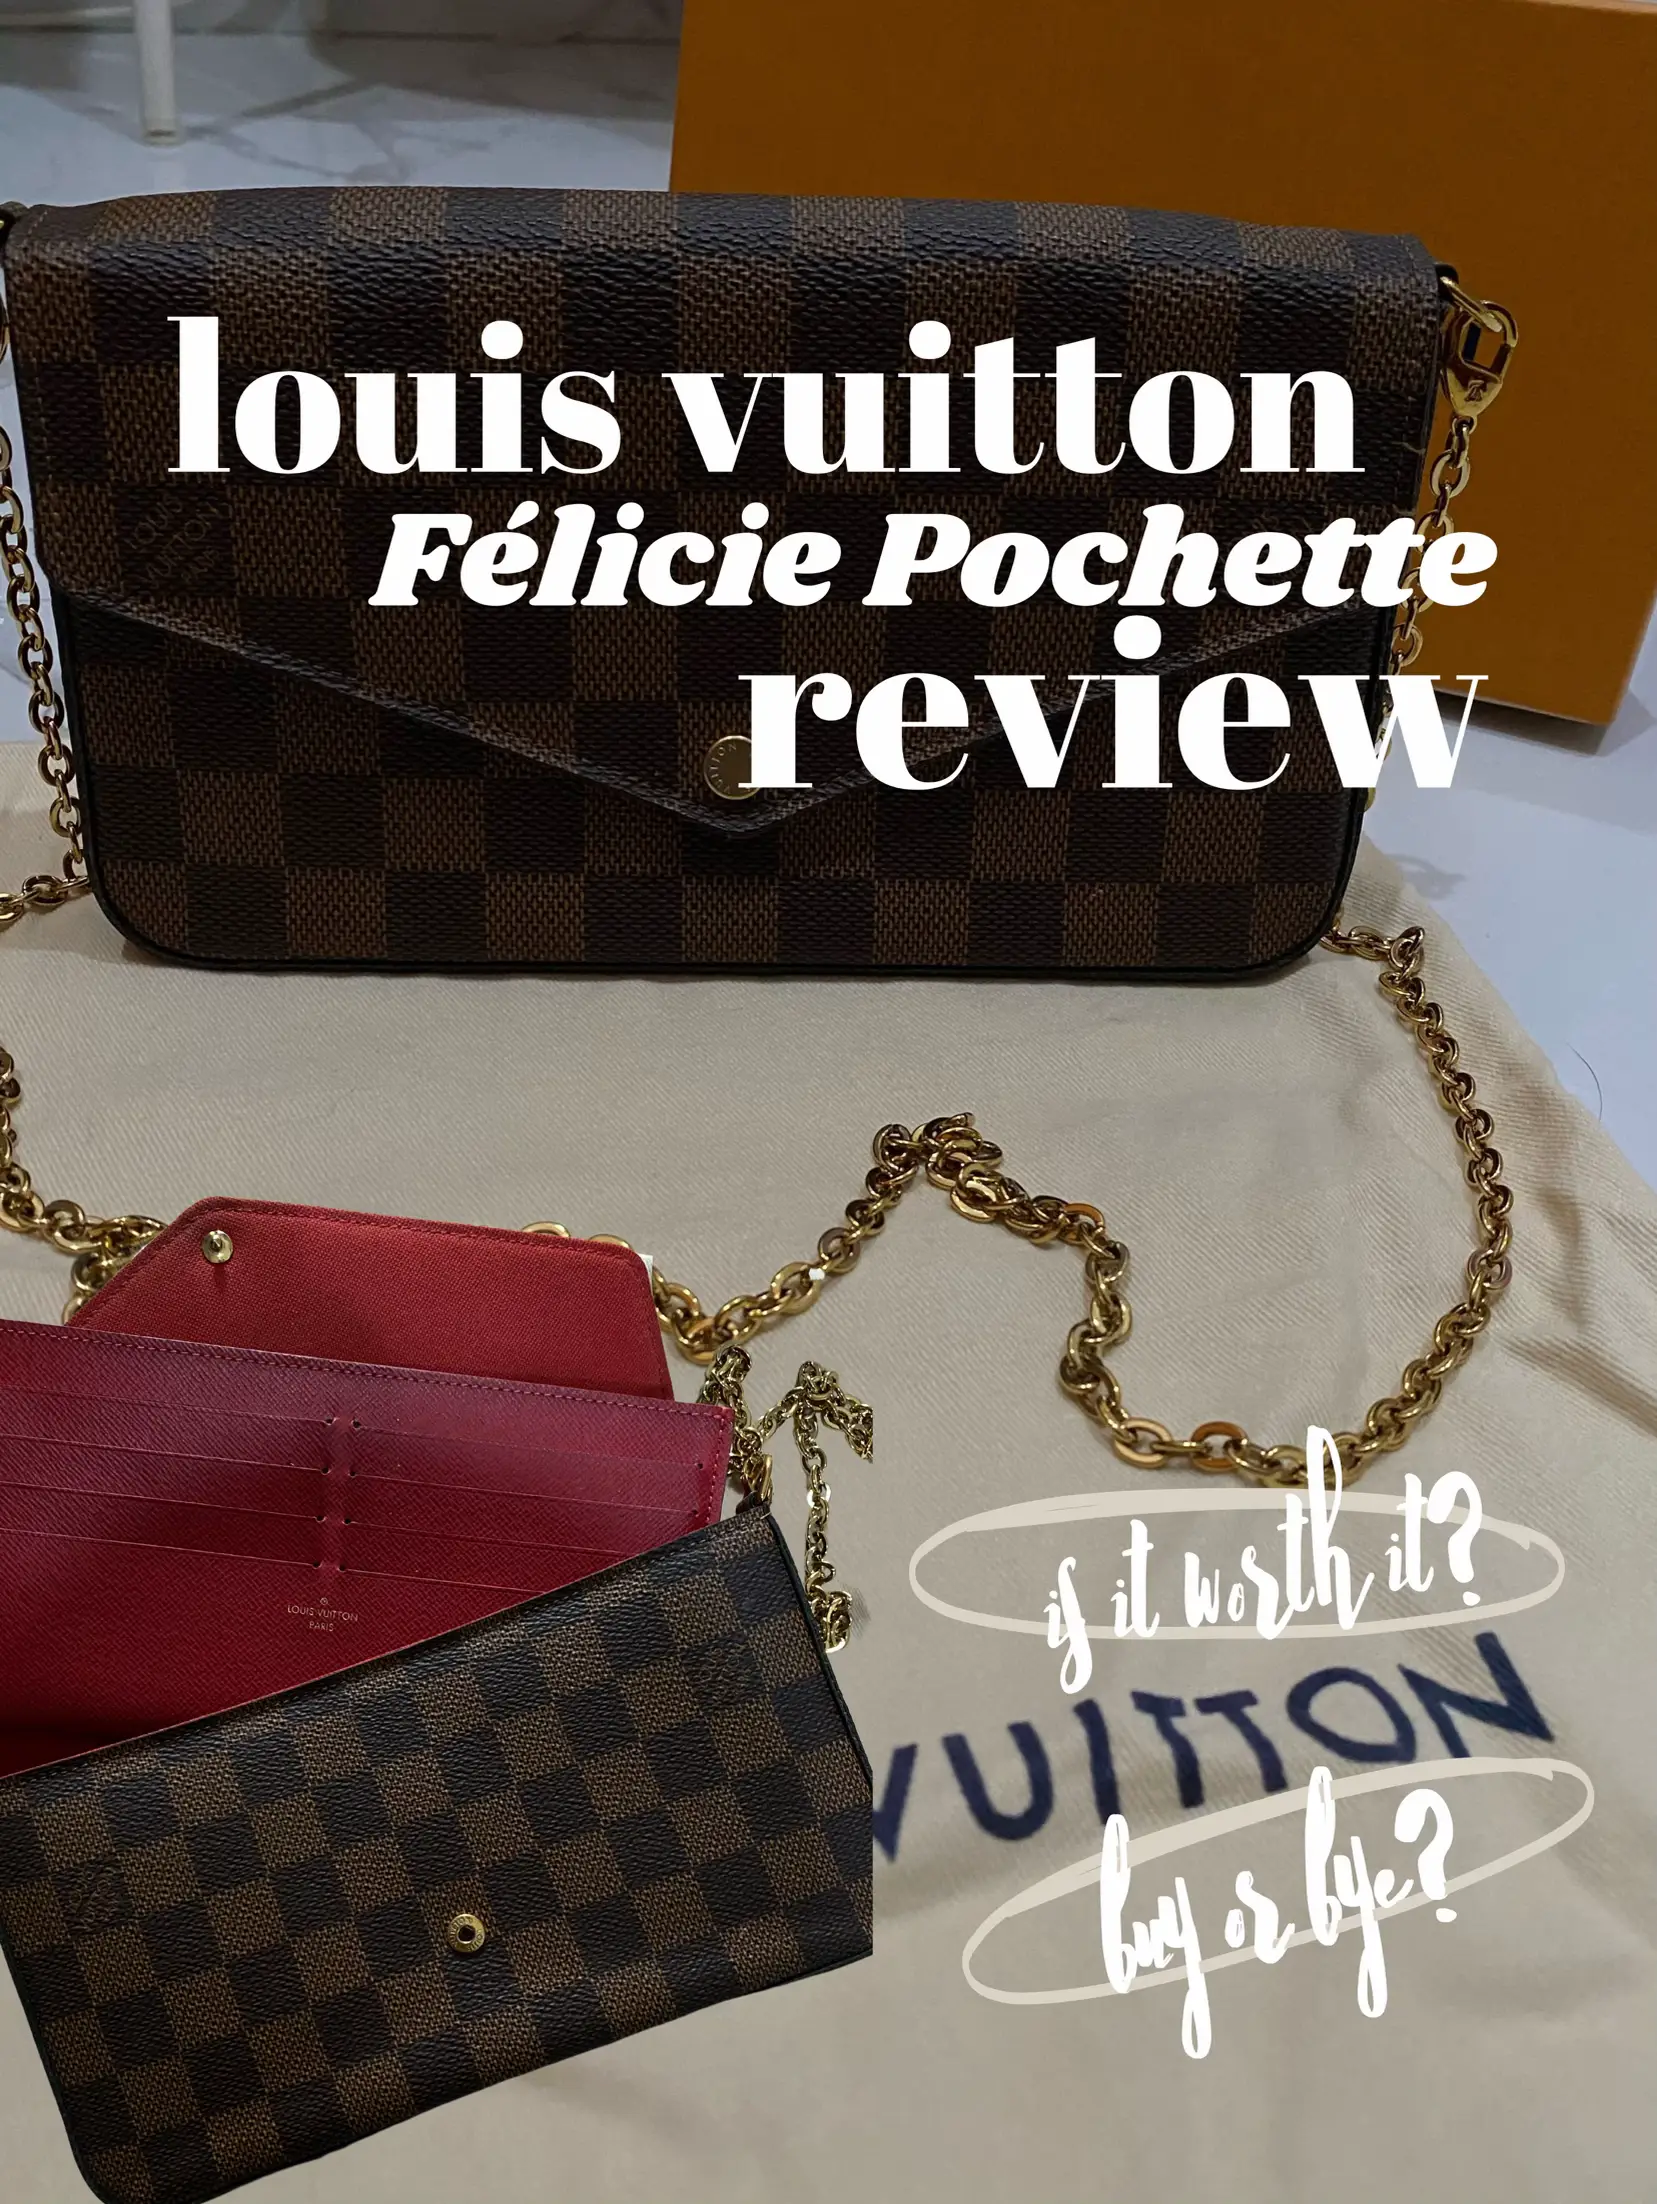 LOUIS VUITTON FELICIE POCHETTE 1 YEAR REVIEW - Should I keep or